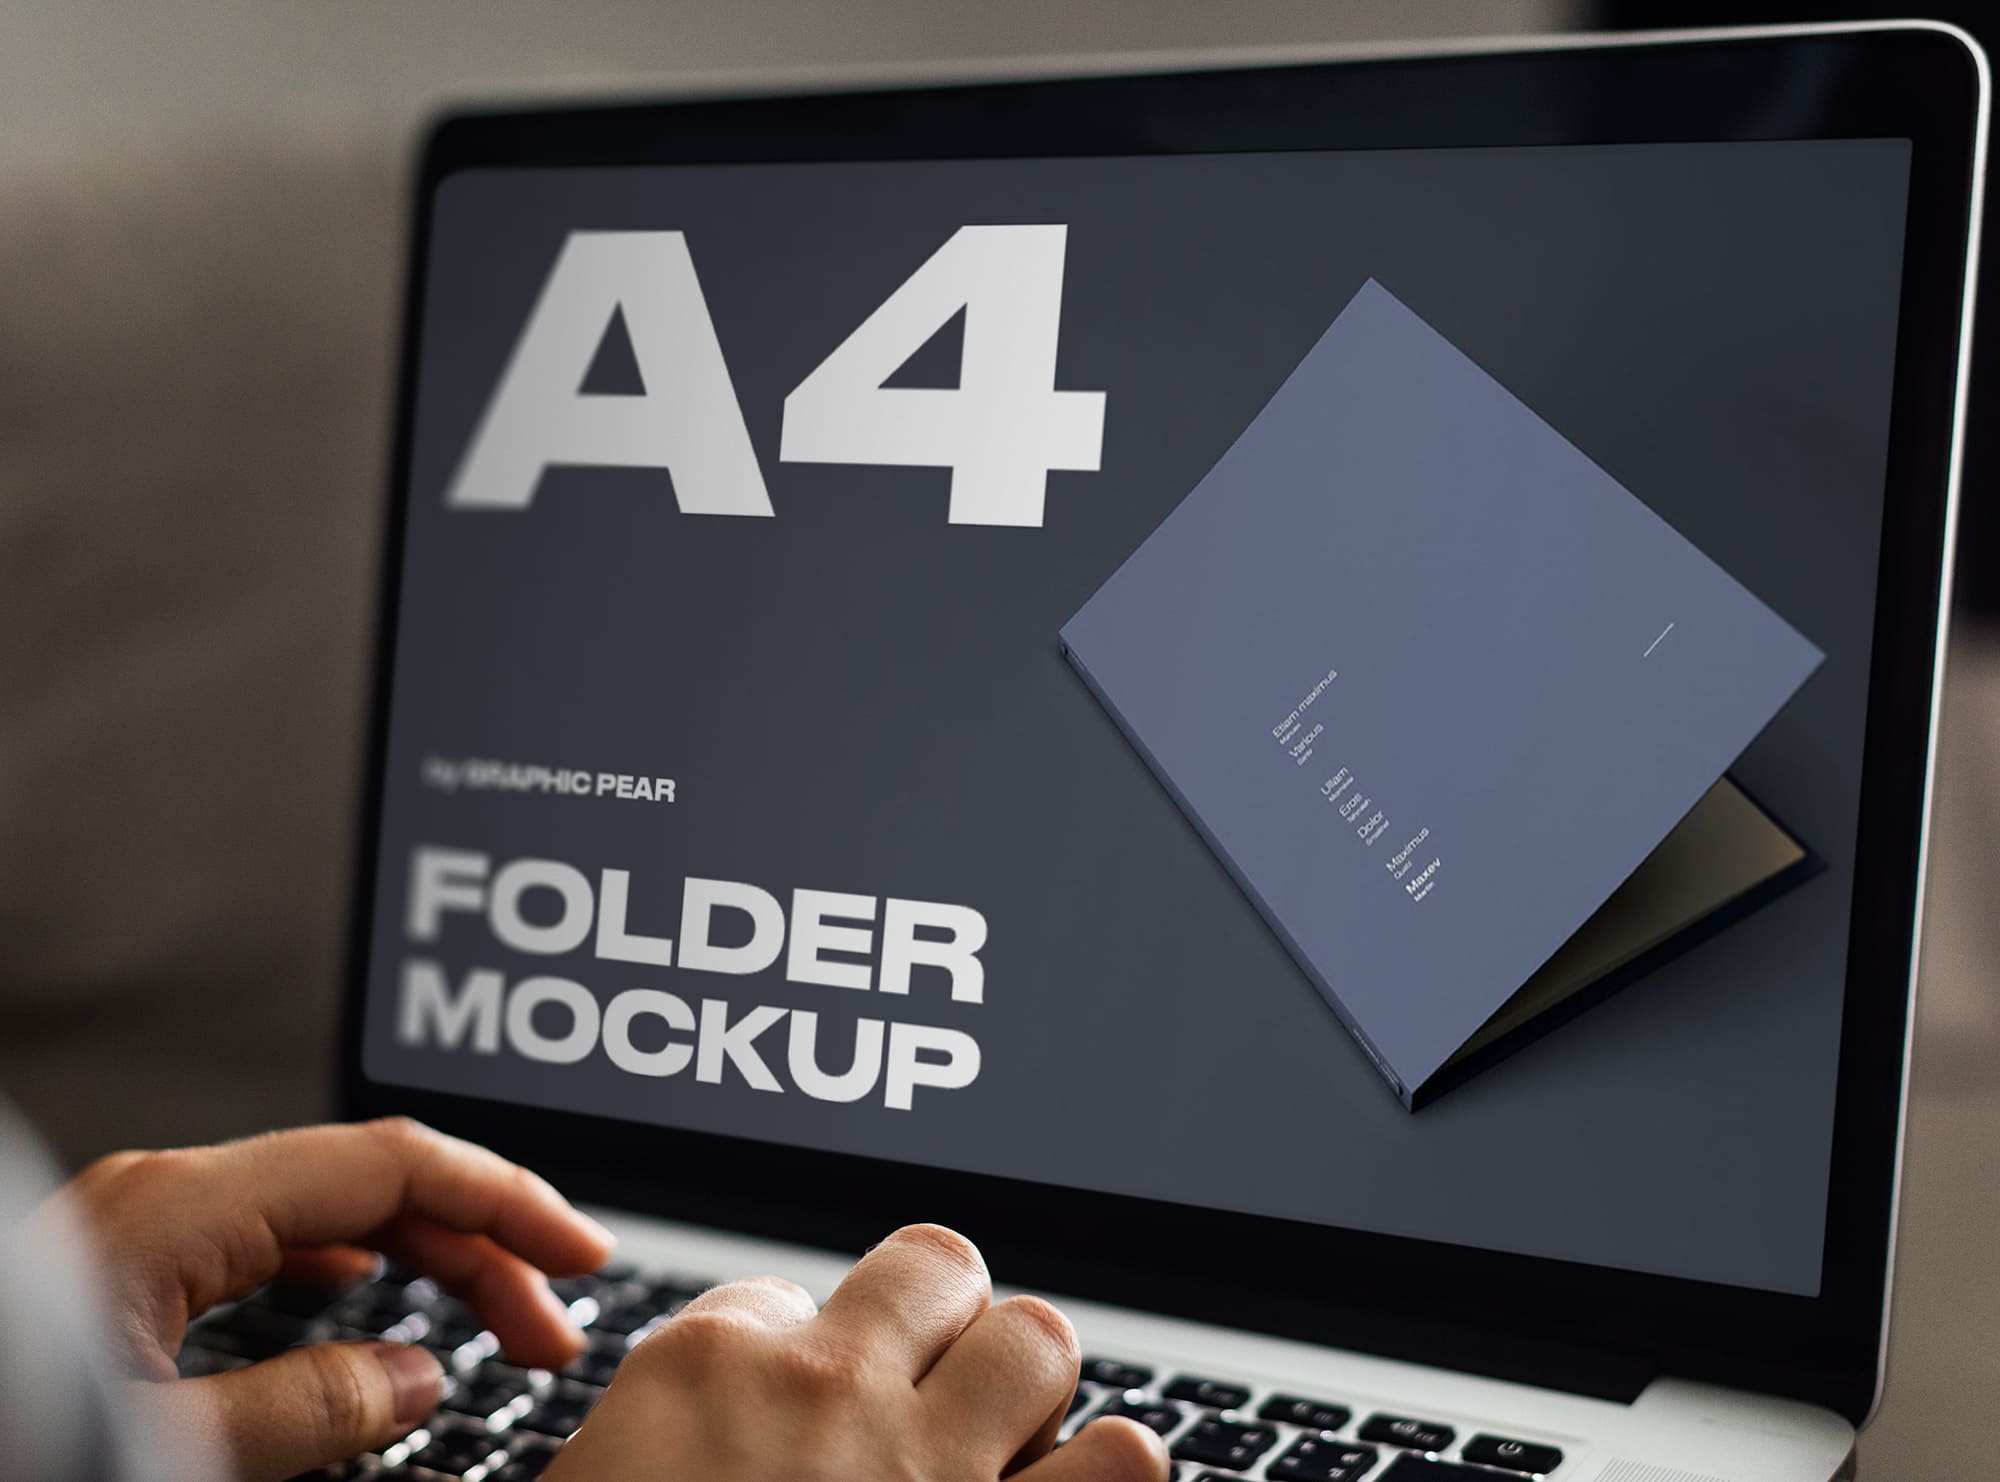 Laptop on screen with lovely A4 folder mockup images.